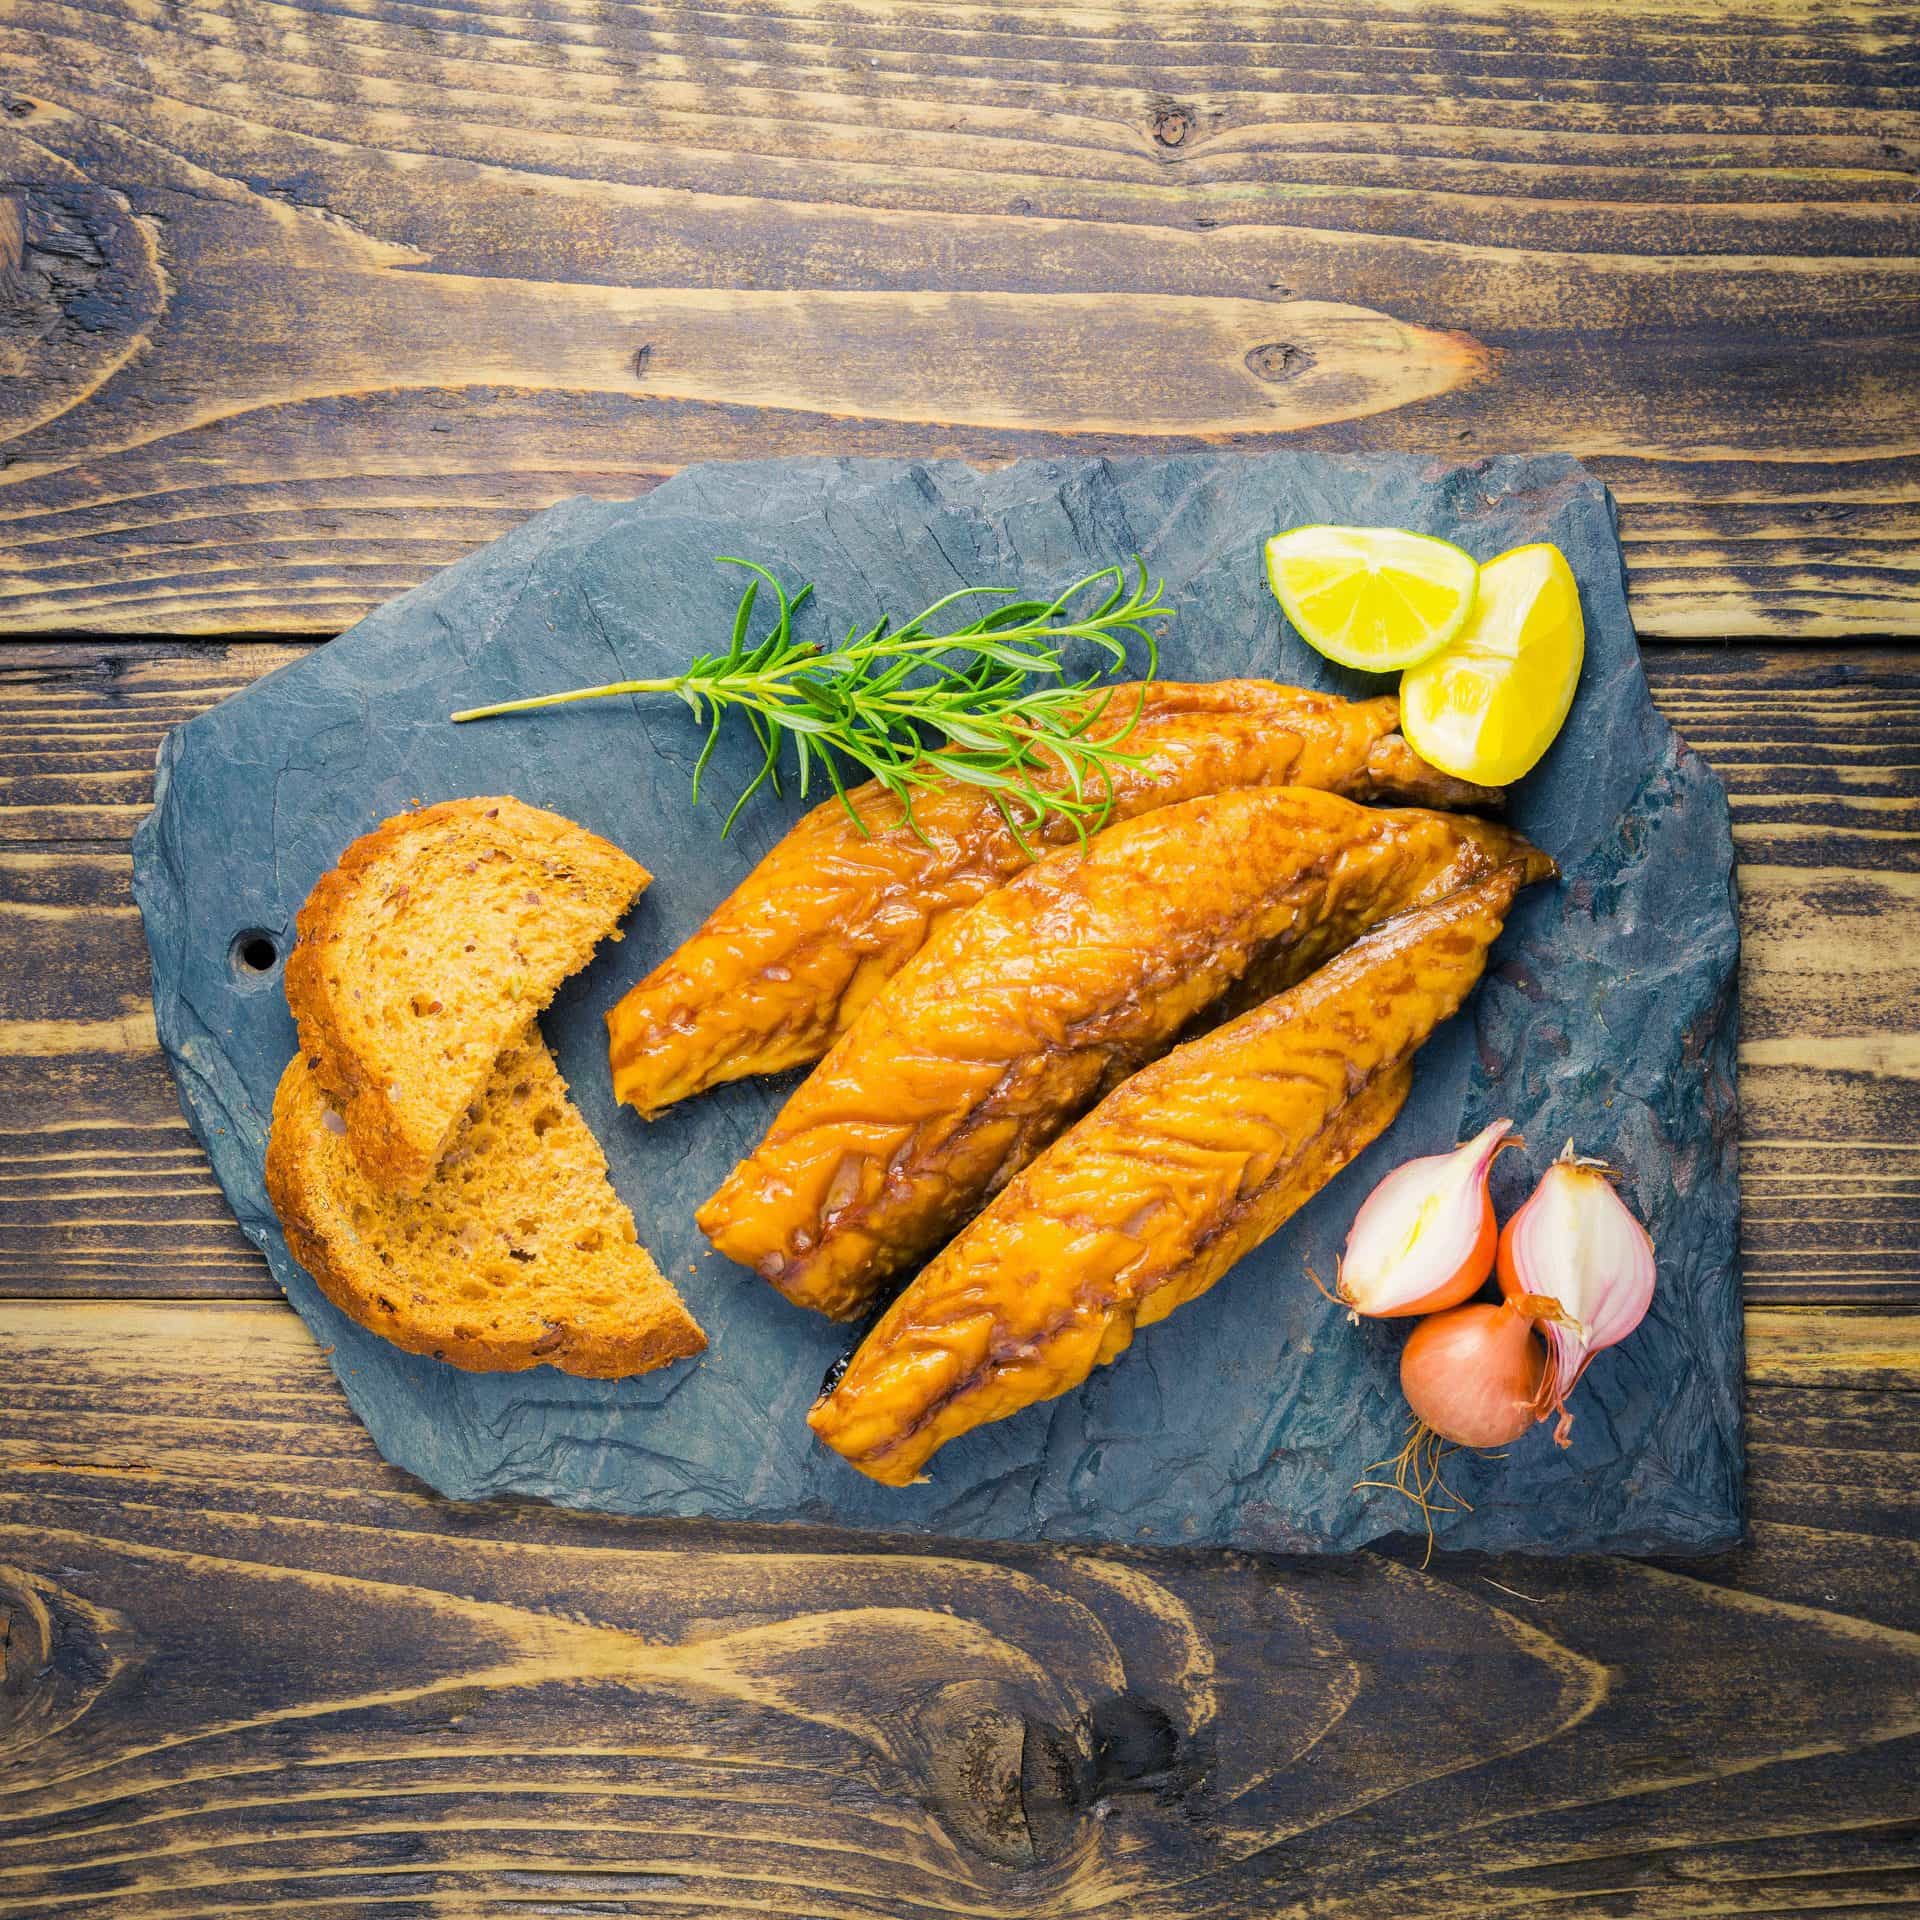 smoked mackerel fillets with brown bread and lemon wedges